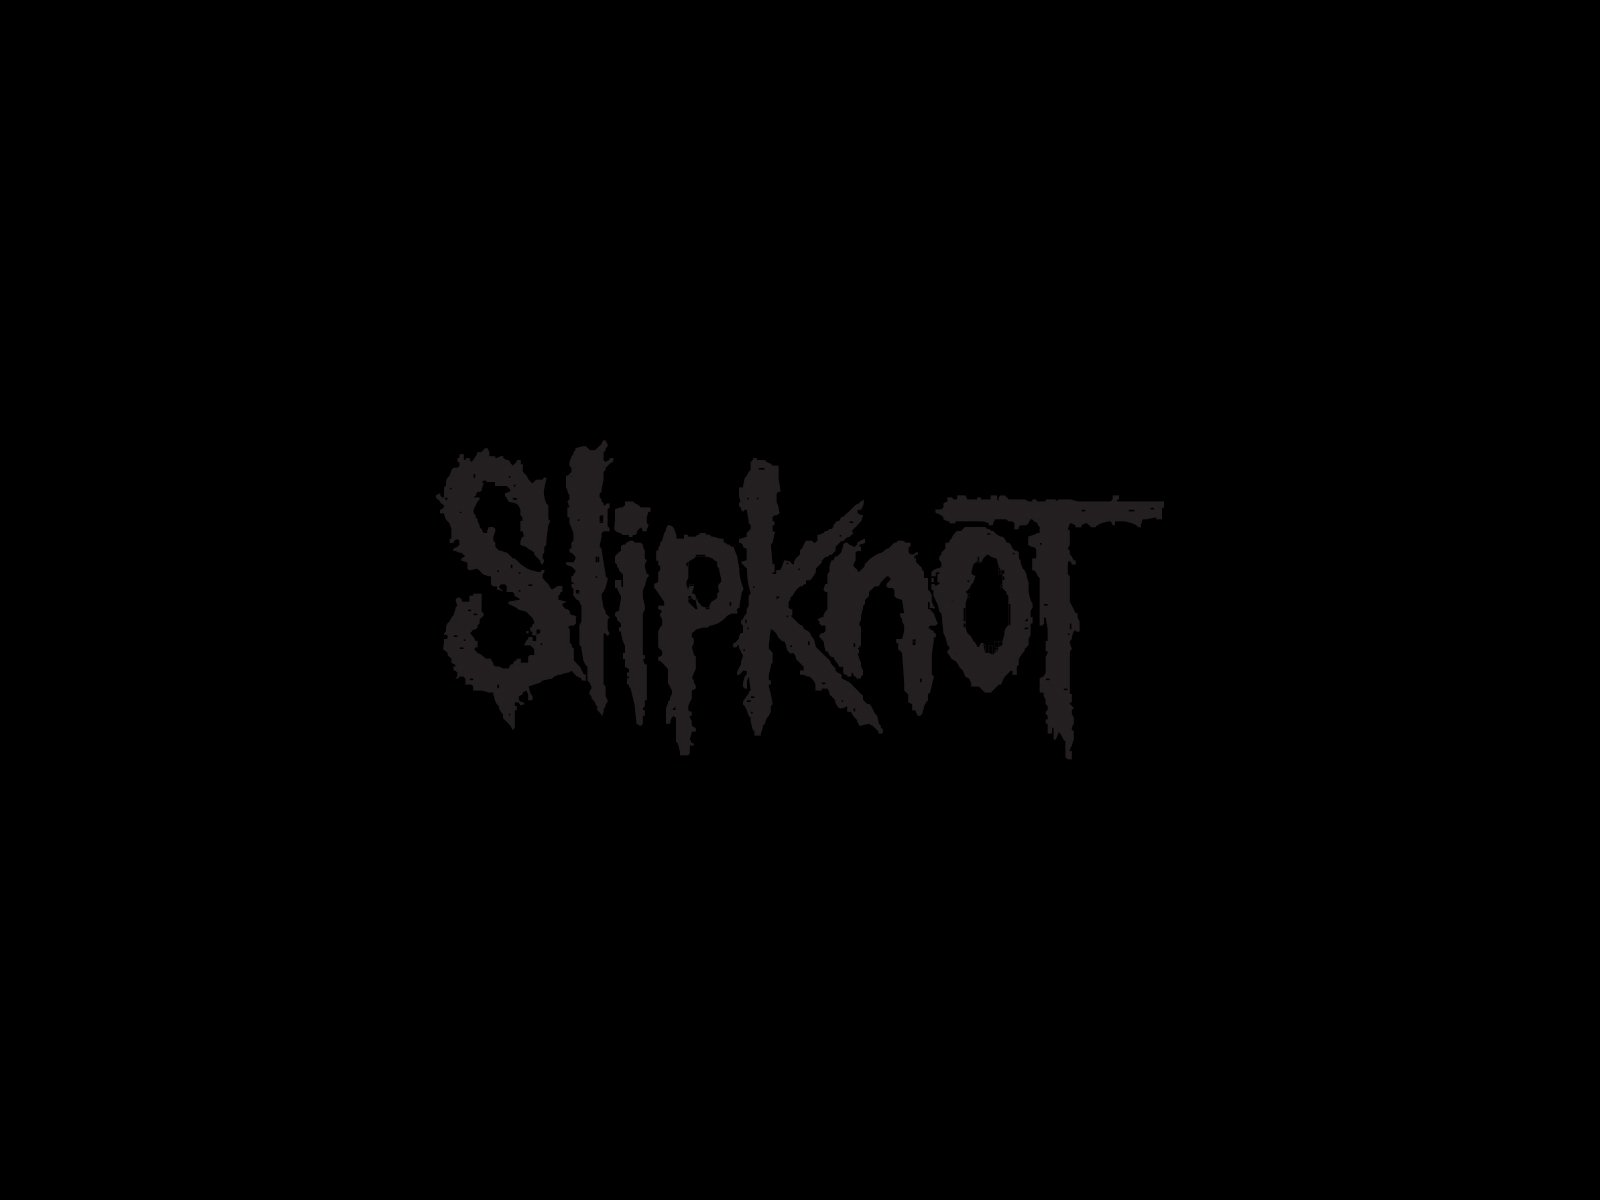 71 Slipknot HD Wallpapers Backgrounds Wallpaper Abyss